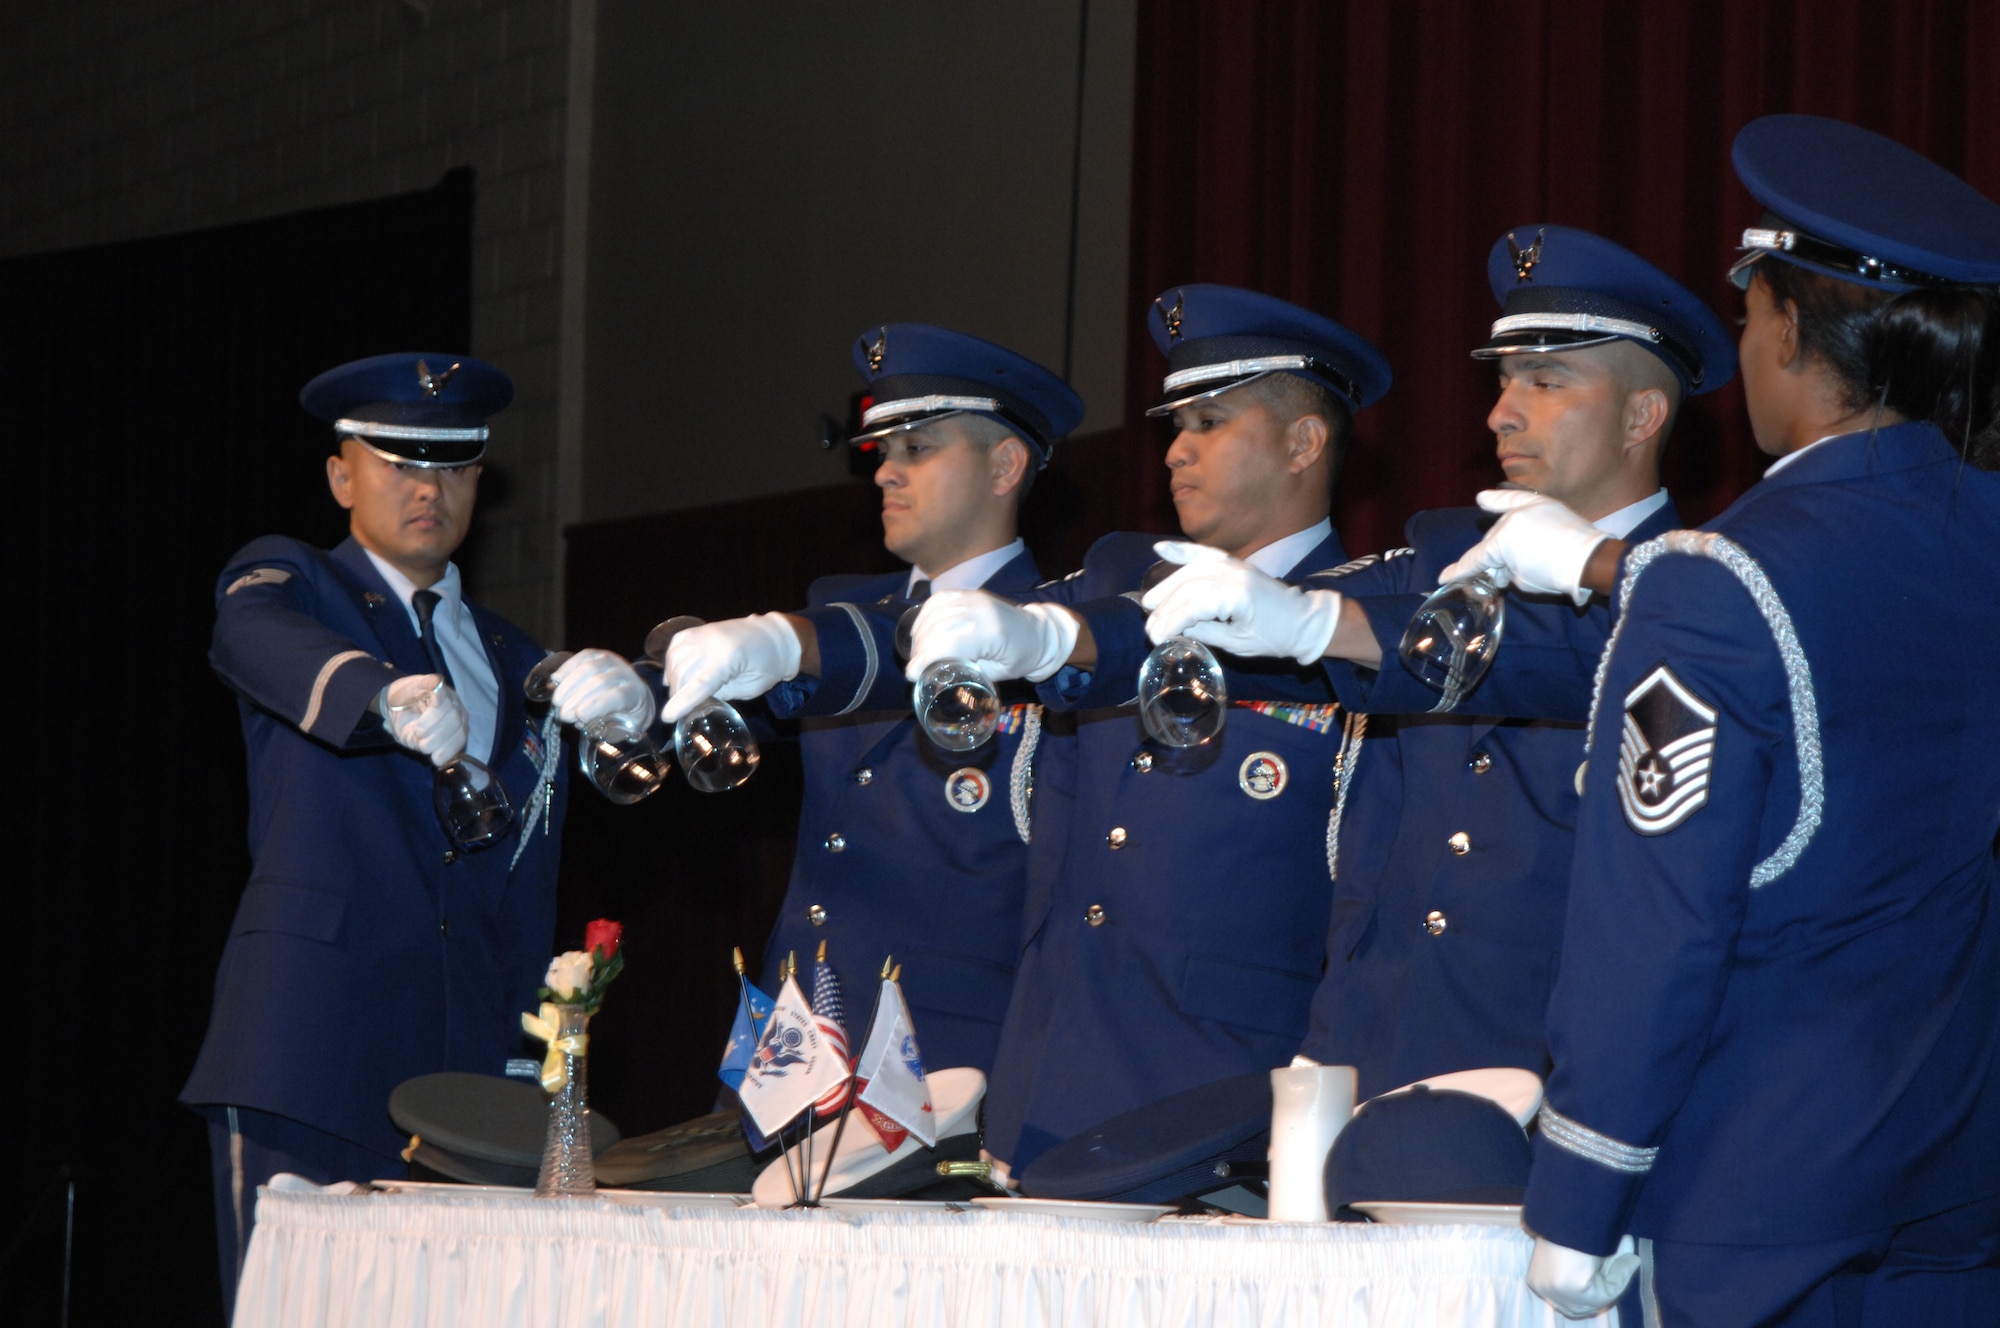 Six members of the Fourth Air Force Honor Guard invert glasses to remind us that our prisoners of war and those missing in action are with us in spirit at the 11th Annual Raincross Trophy Dinner held July 23, 2009, at the Riverside Convention Center, Riverside, Calilf. The dinner is hosted by the Greater Riverside Chambers of Commerce Military Affairs Committee to honor and recognize the 11 wings and two groups in Fourth Air Force.  (U. S. Air Force phot/Senior Master Sgt. Kim Allain)  (released)